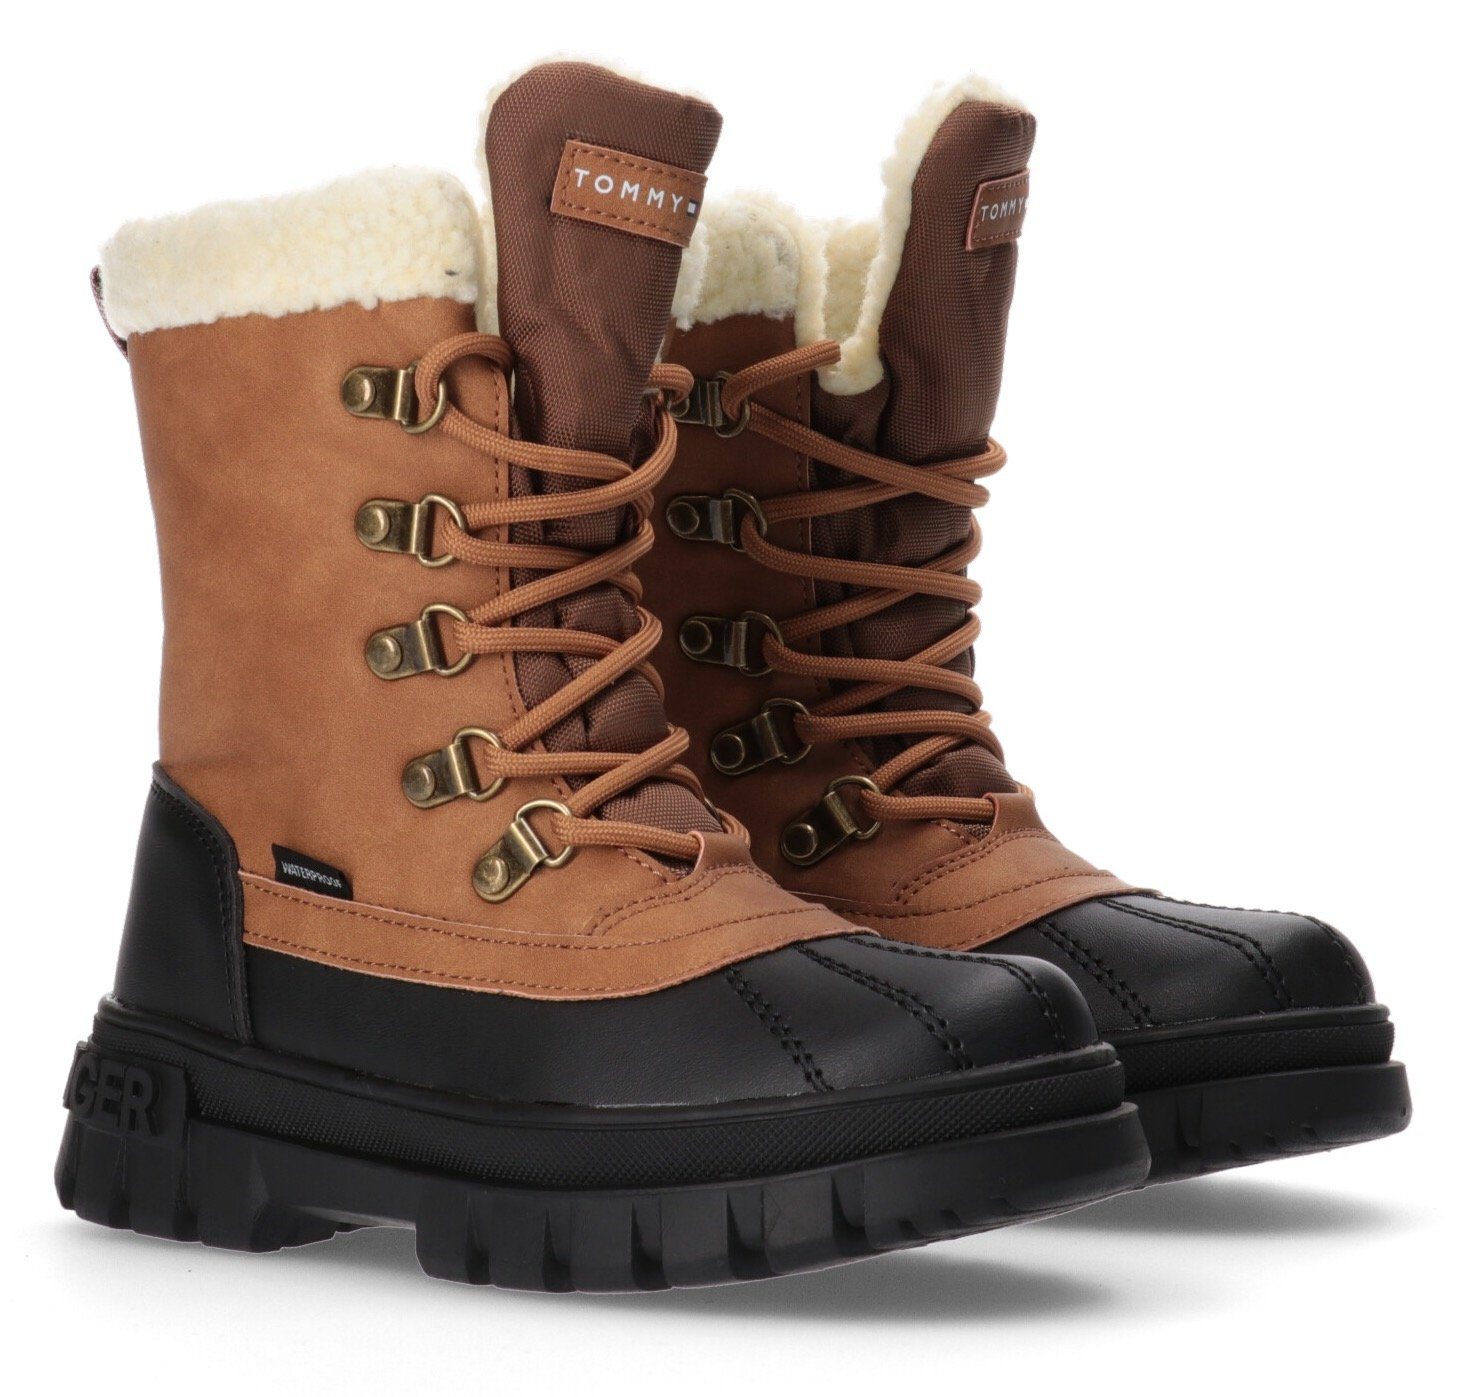 Tommy Hilfiger Thermostiefel LACE-UP Snowboots BOOT mit Warmfutter